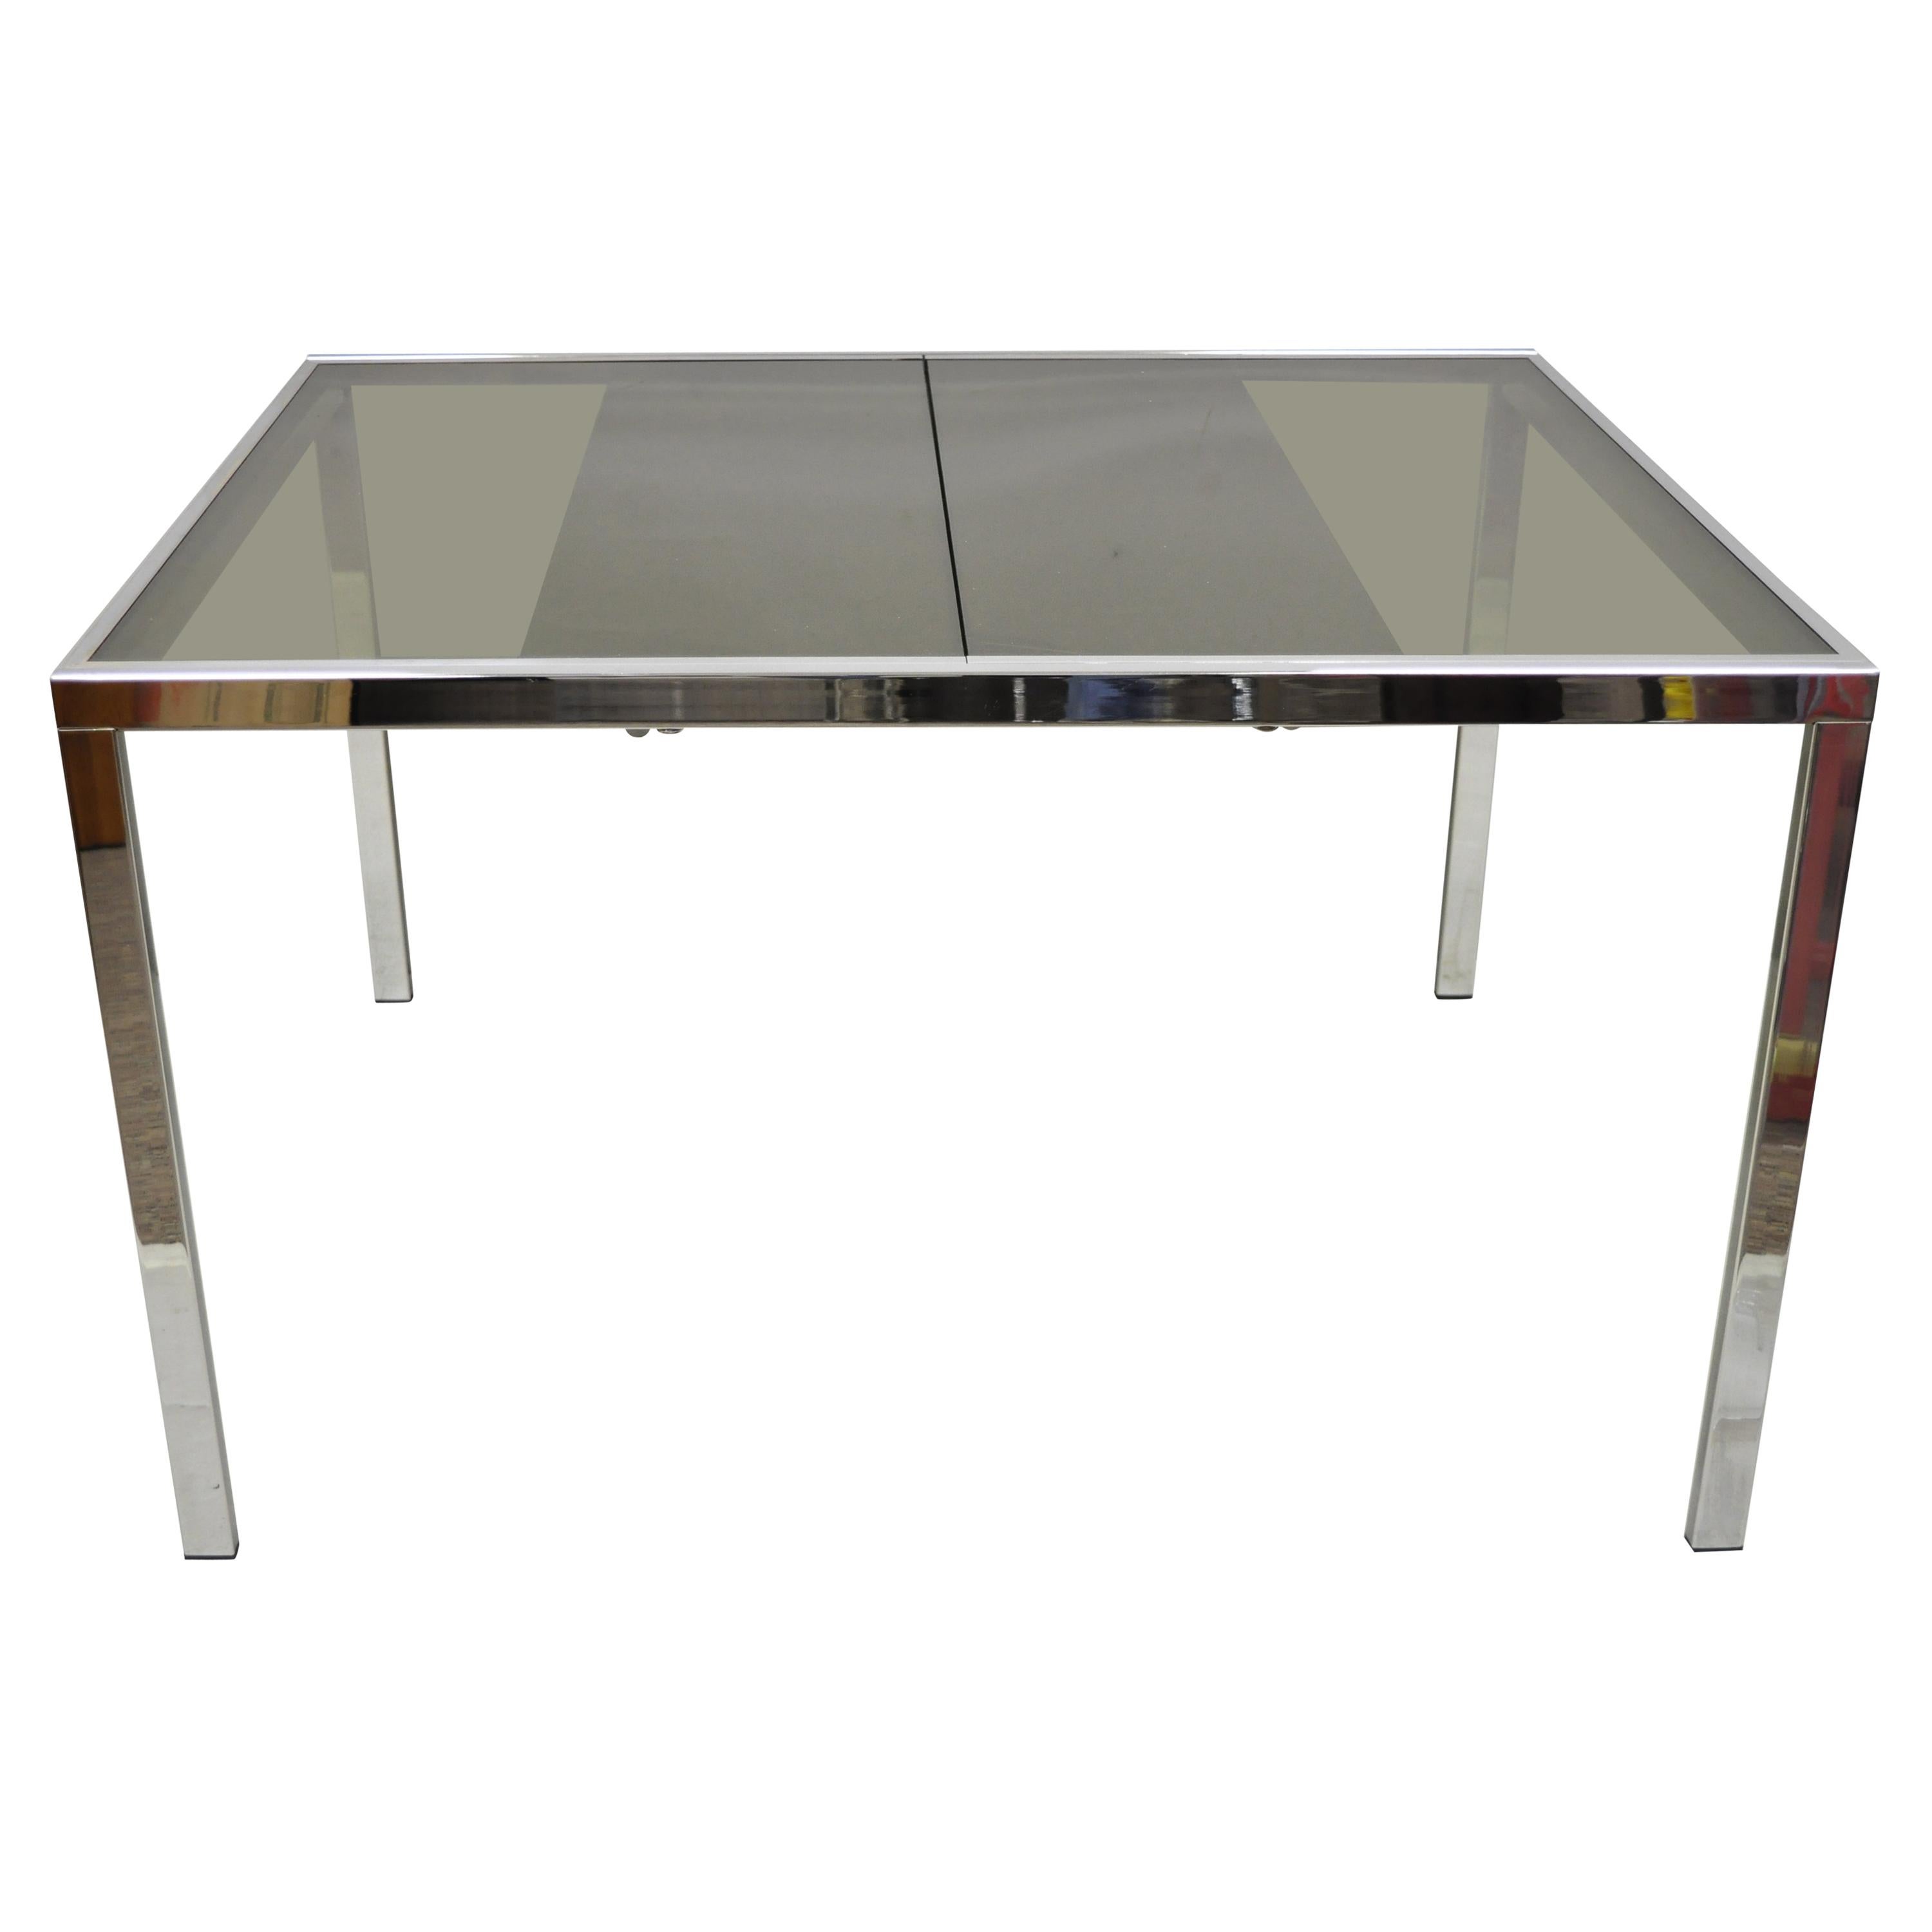 Midcentury Italian Modern Chrome and Glass Extension Dining Table